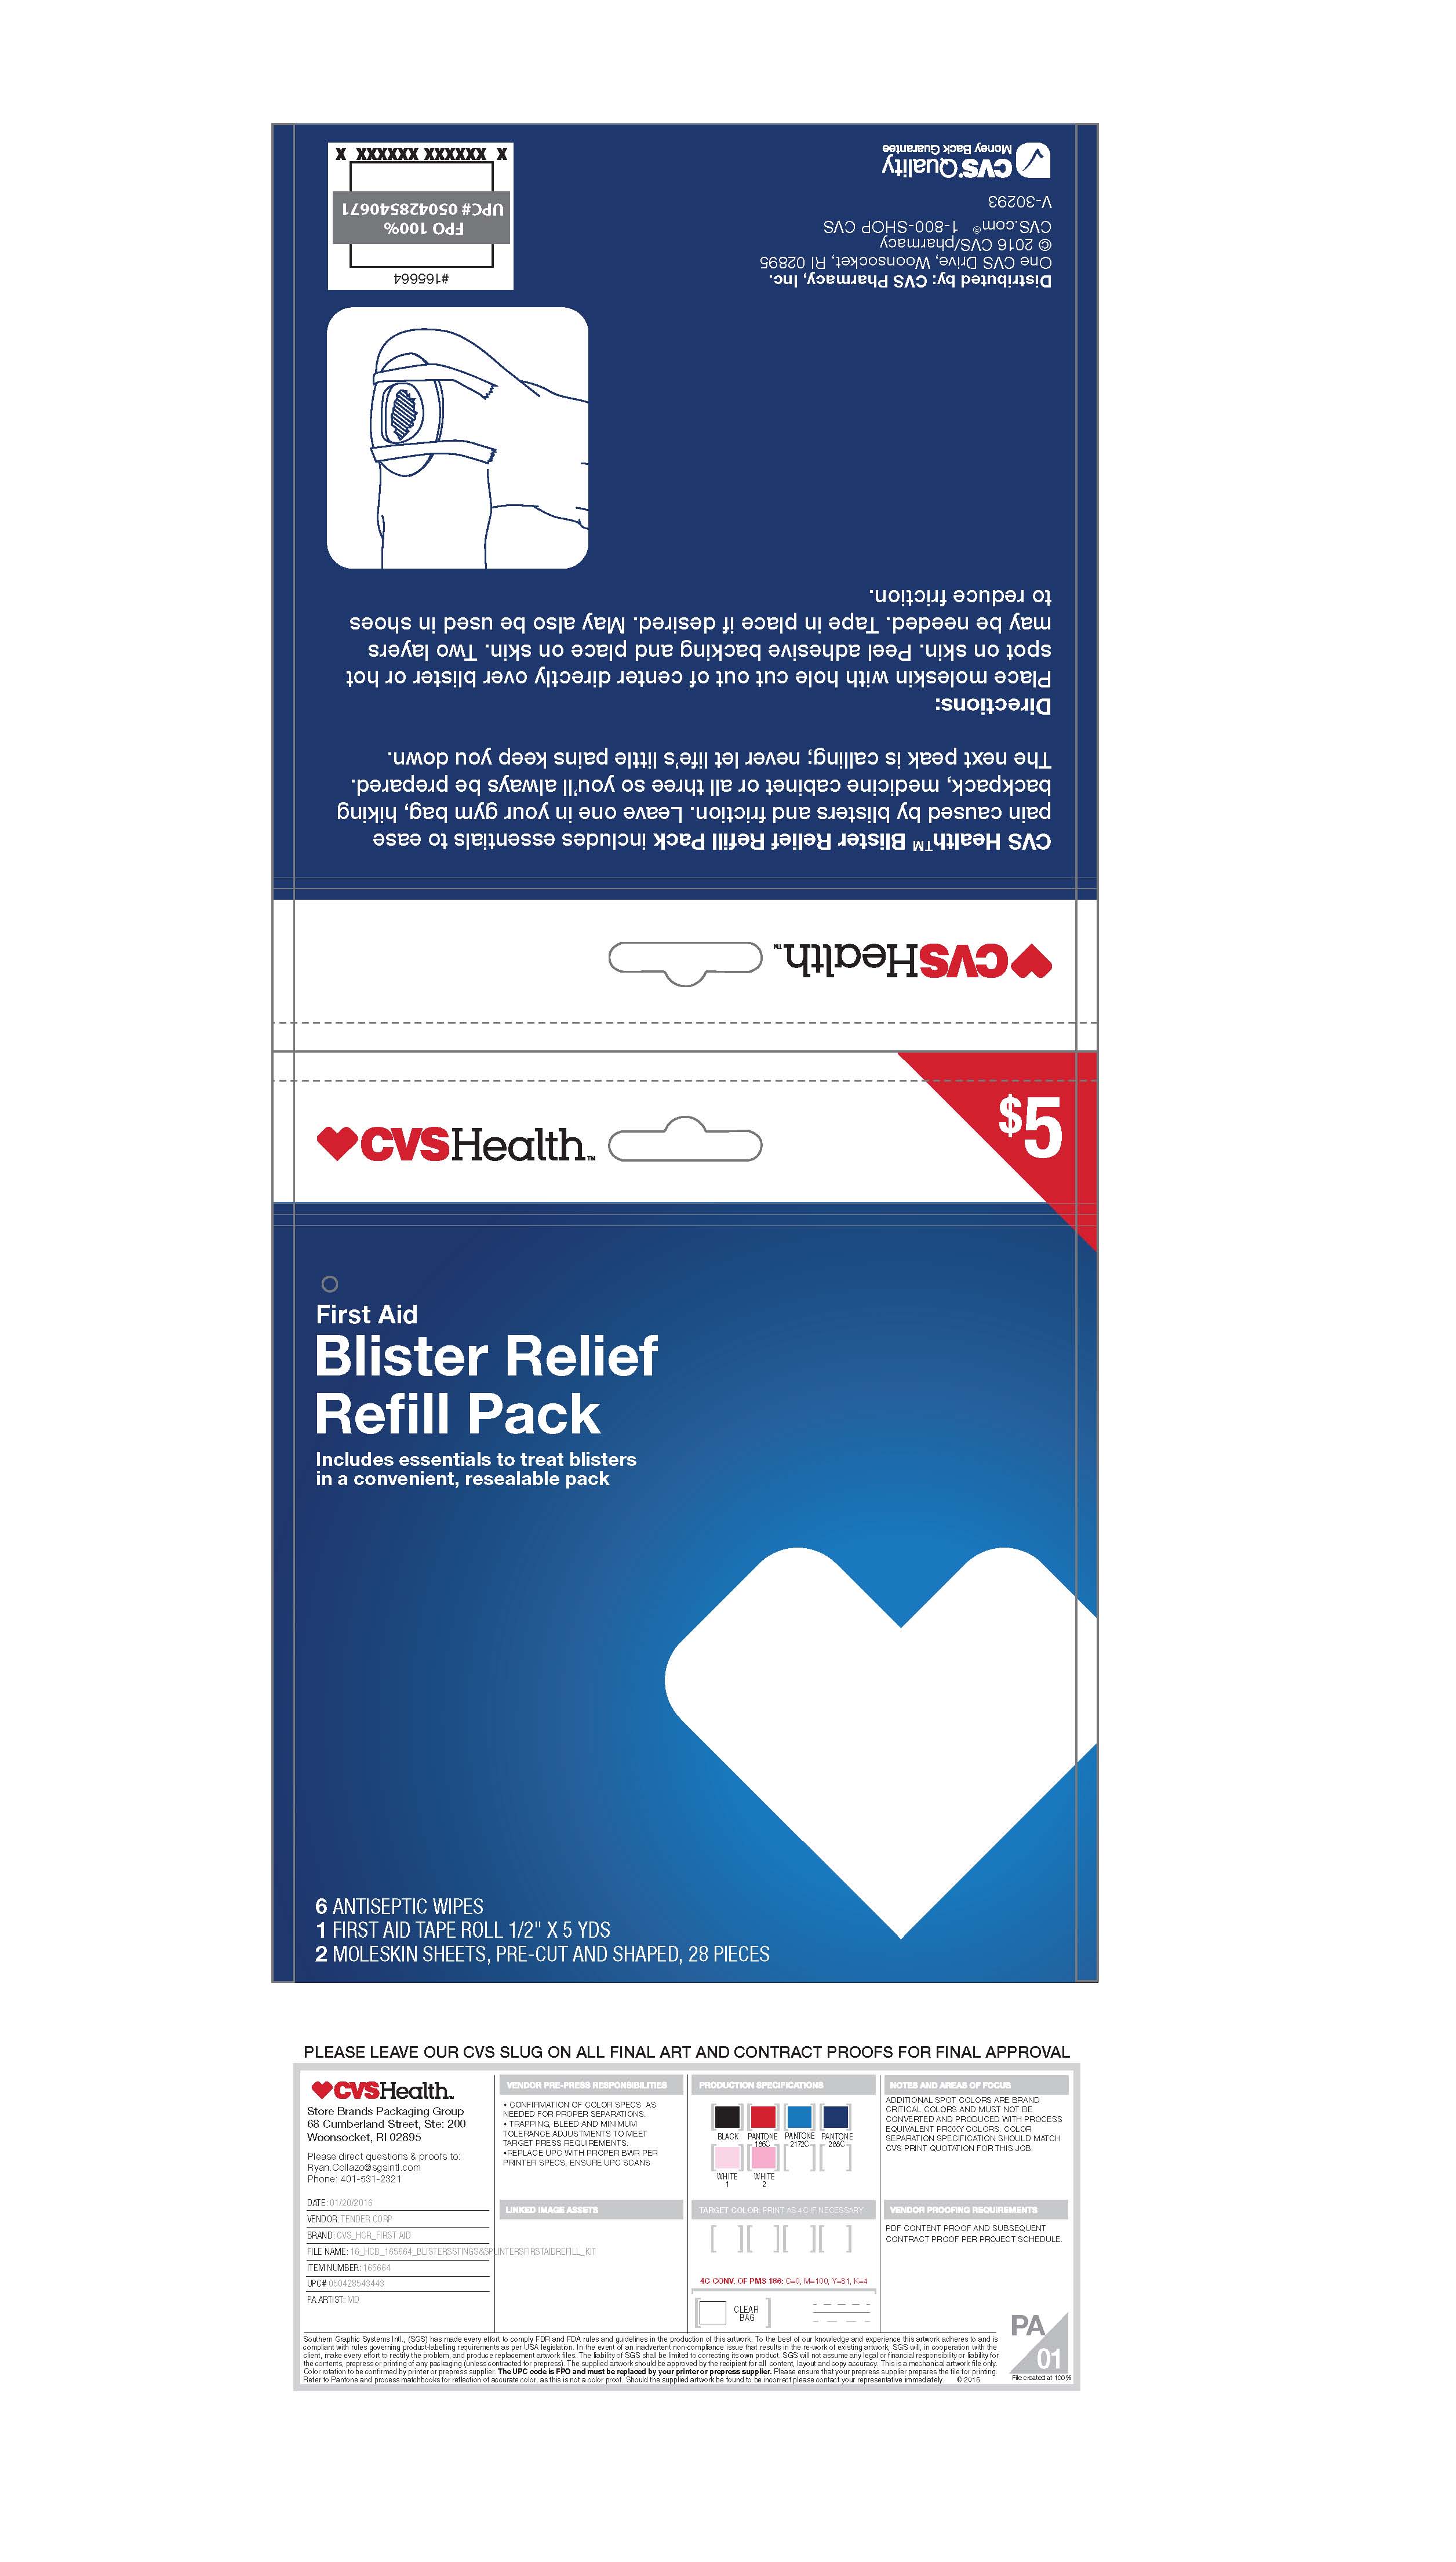 Blister Relief Refill Pack